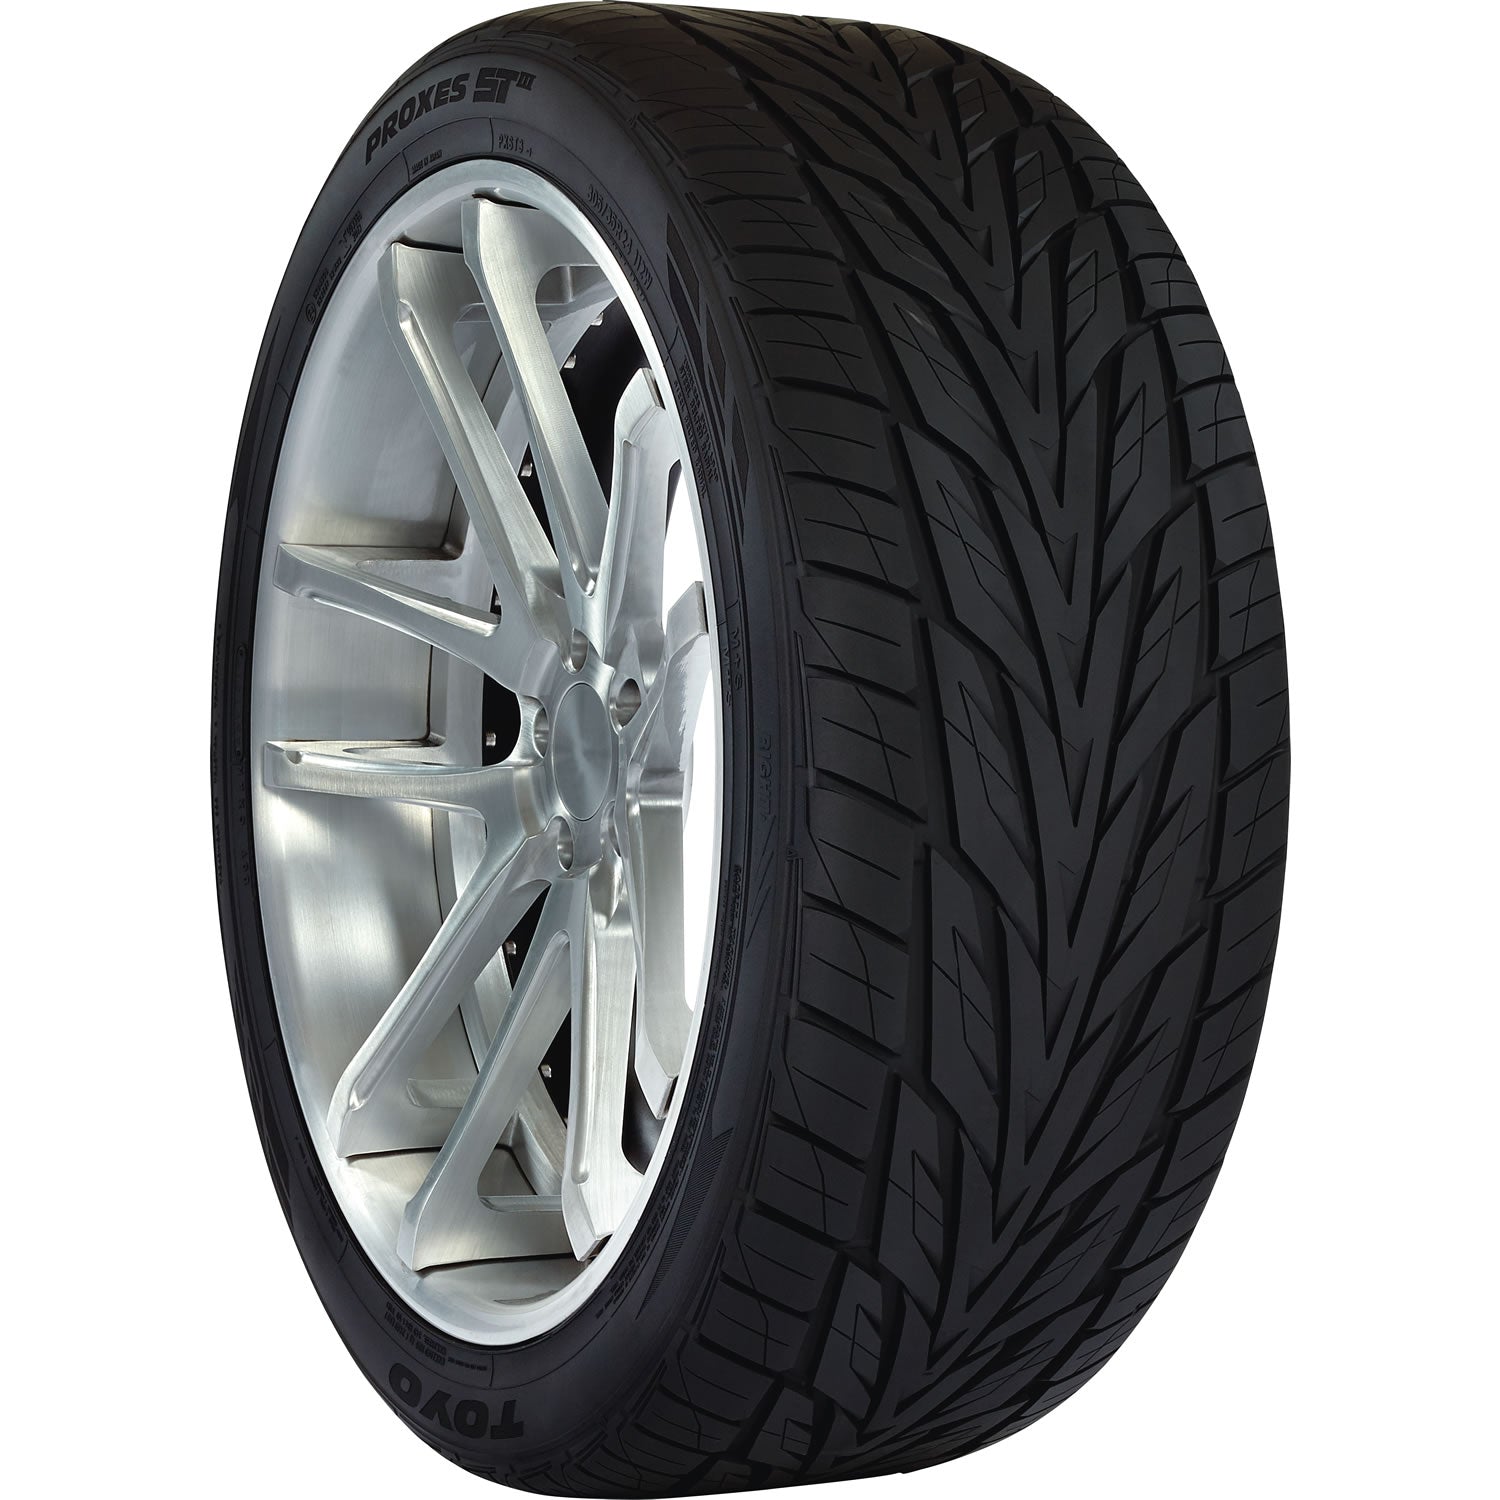 TOYO TIRES PROXES ST III 275/45R20 (29.8X10.7R 20) Tires